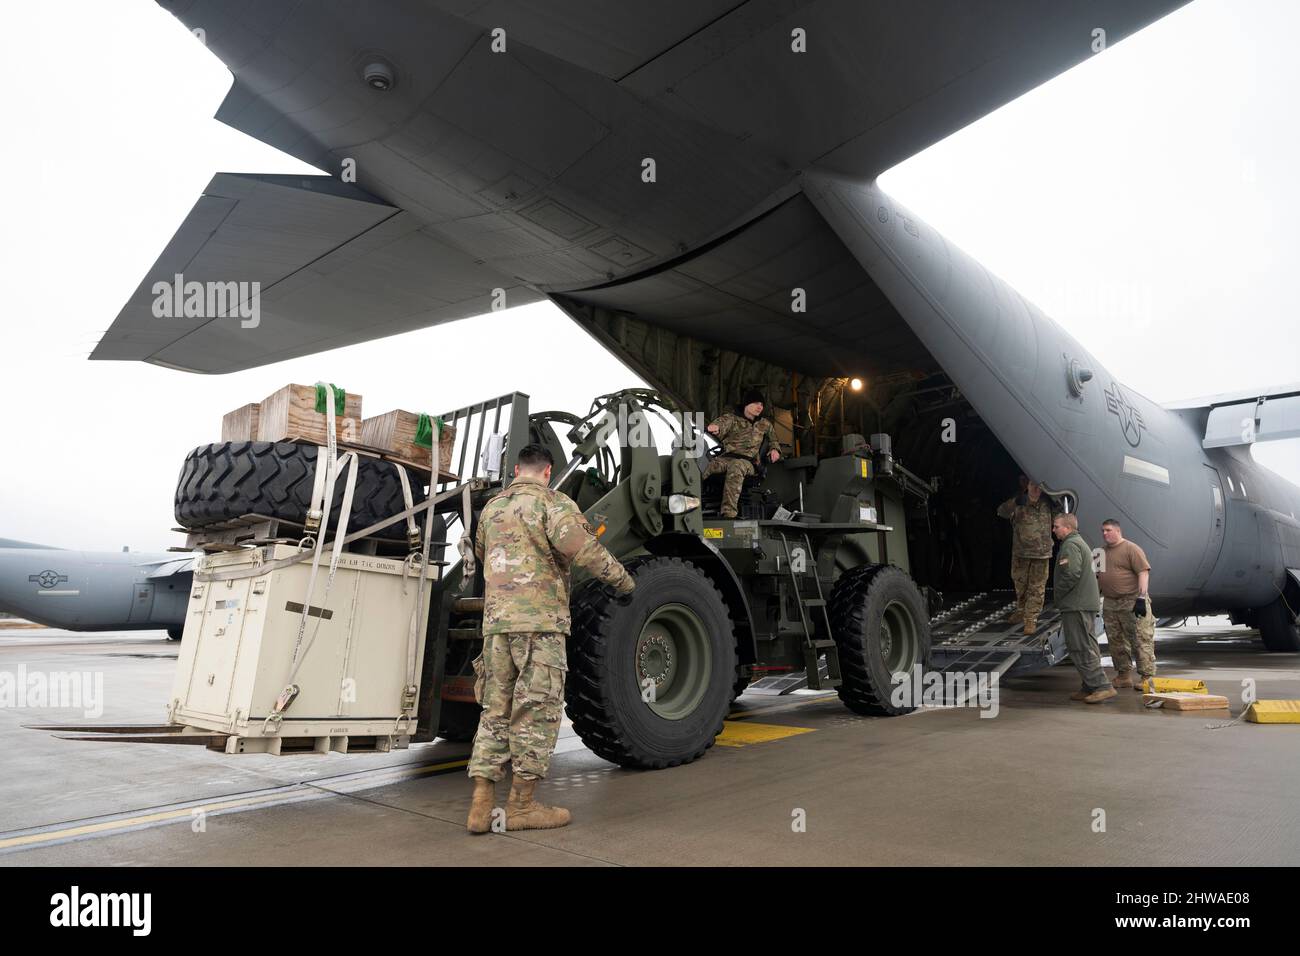 Ramstein Air Base, Germany. 4th Feb, 2022. U.S. Air Force Airmen assigned to the 86th Airlift Wing load supplies onto a C-130J Super Hercules aircraft at Ramstein Air Base, Germany, Feb. 4, 2022. A small element of 435th Contingency Response Group personnel have deployed to Poland, at their government's request, to prepare to assist humanitarian efforts resulting from a possible Russian incursion into Ukraine. Credit: U.S. Army/ZUMA Press Wire Service/ZUMAPRESS.com/Alamy Live News Stock Photo